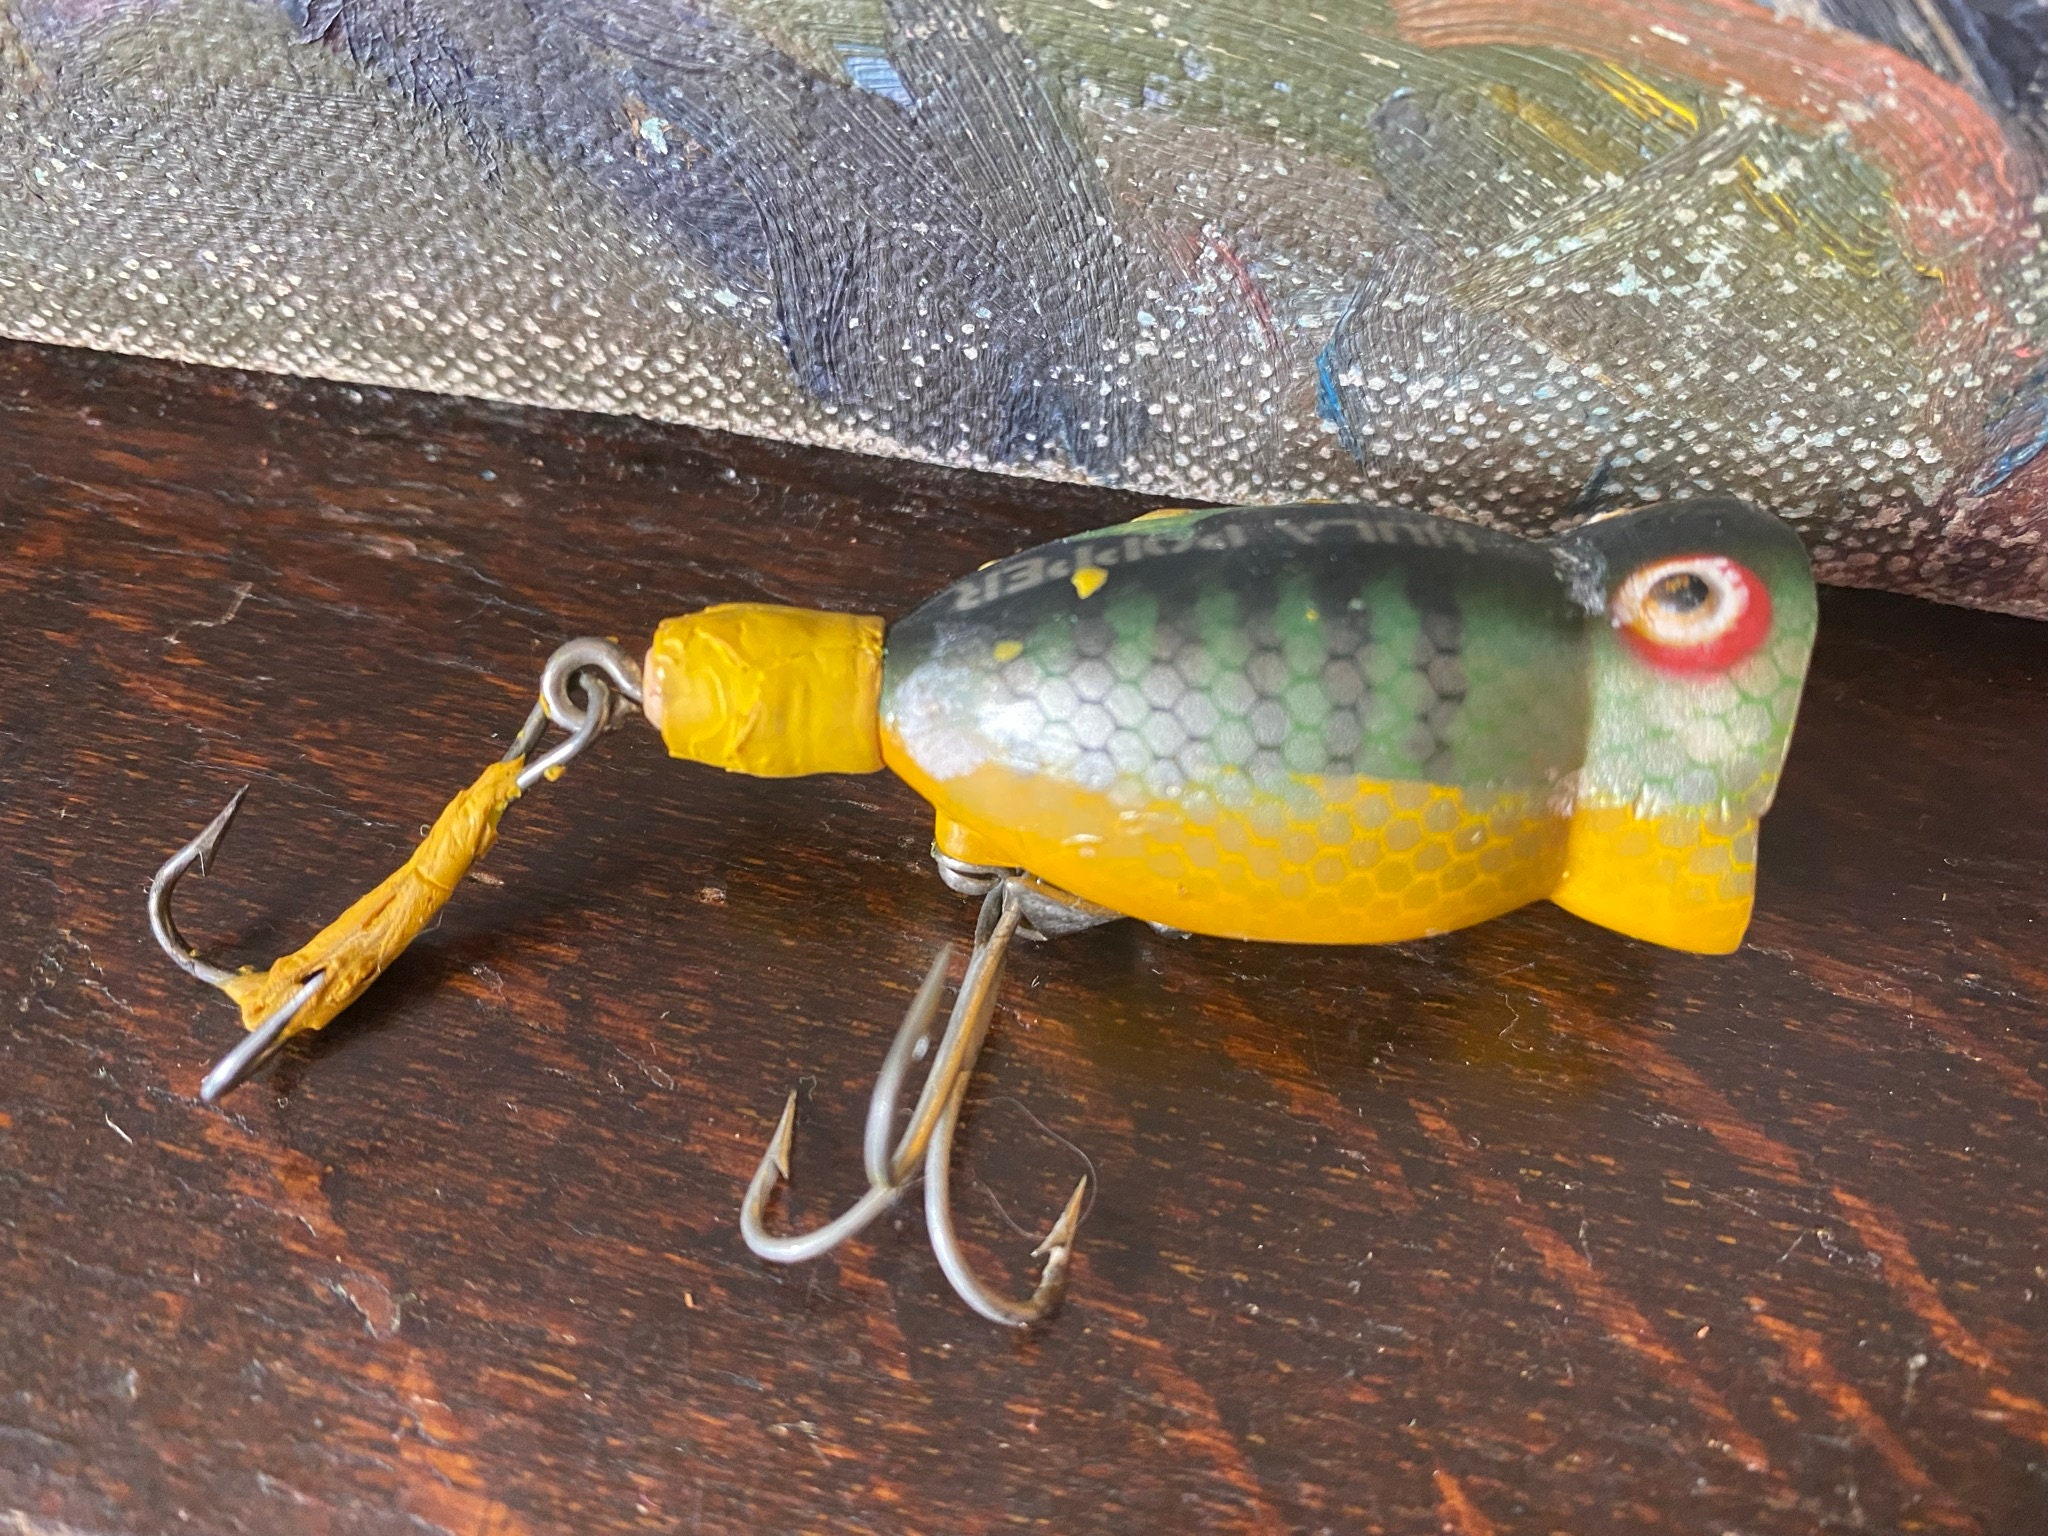 Five Vintage Fishing Lures, 3 7/8 Bass Lure, 4 7/8 Flowering Floreo In  Original Container, Original Rapala Wobbler Finish, Original Box 4 3/8, 2  Shaker With Tail, Hula Popper 2 1/4, Good